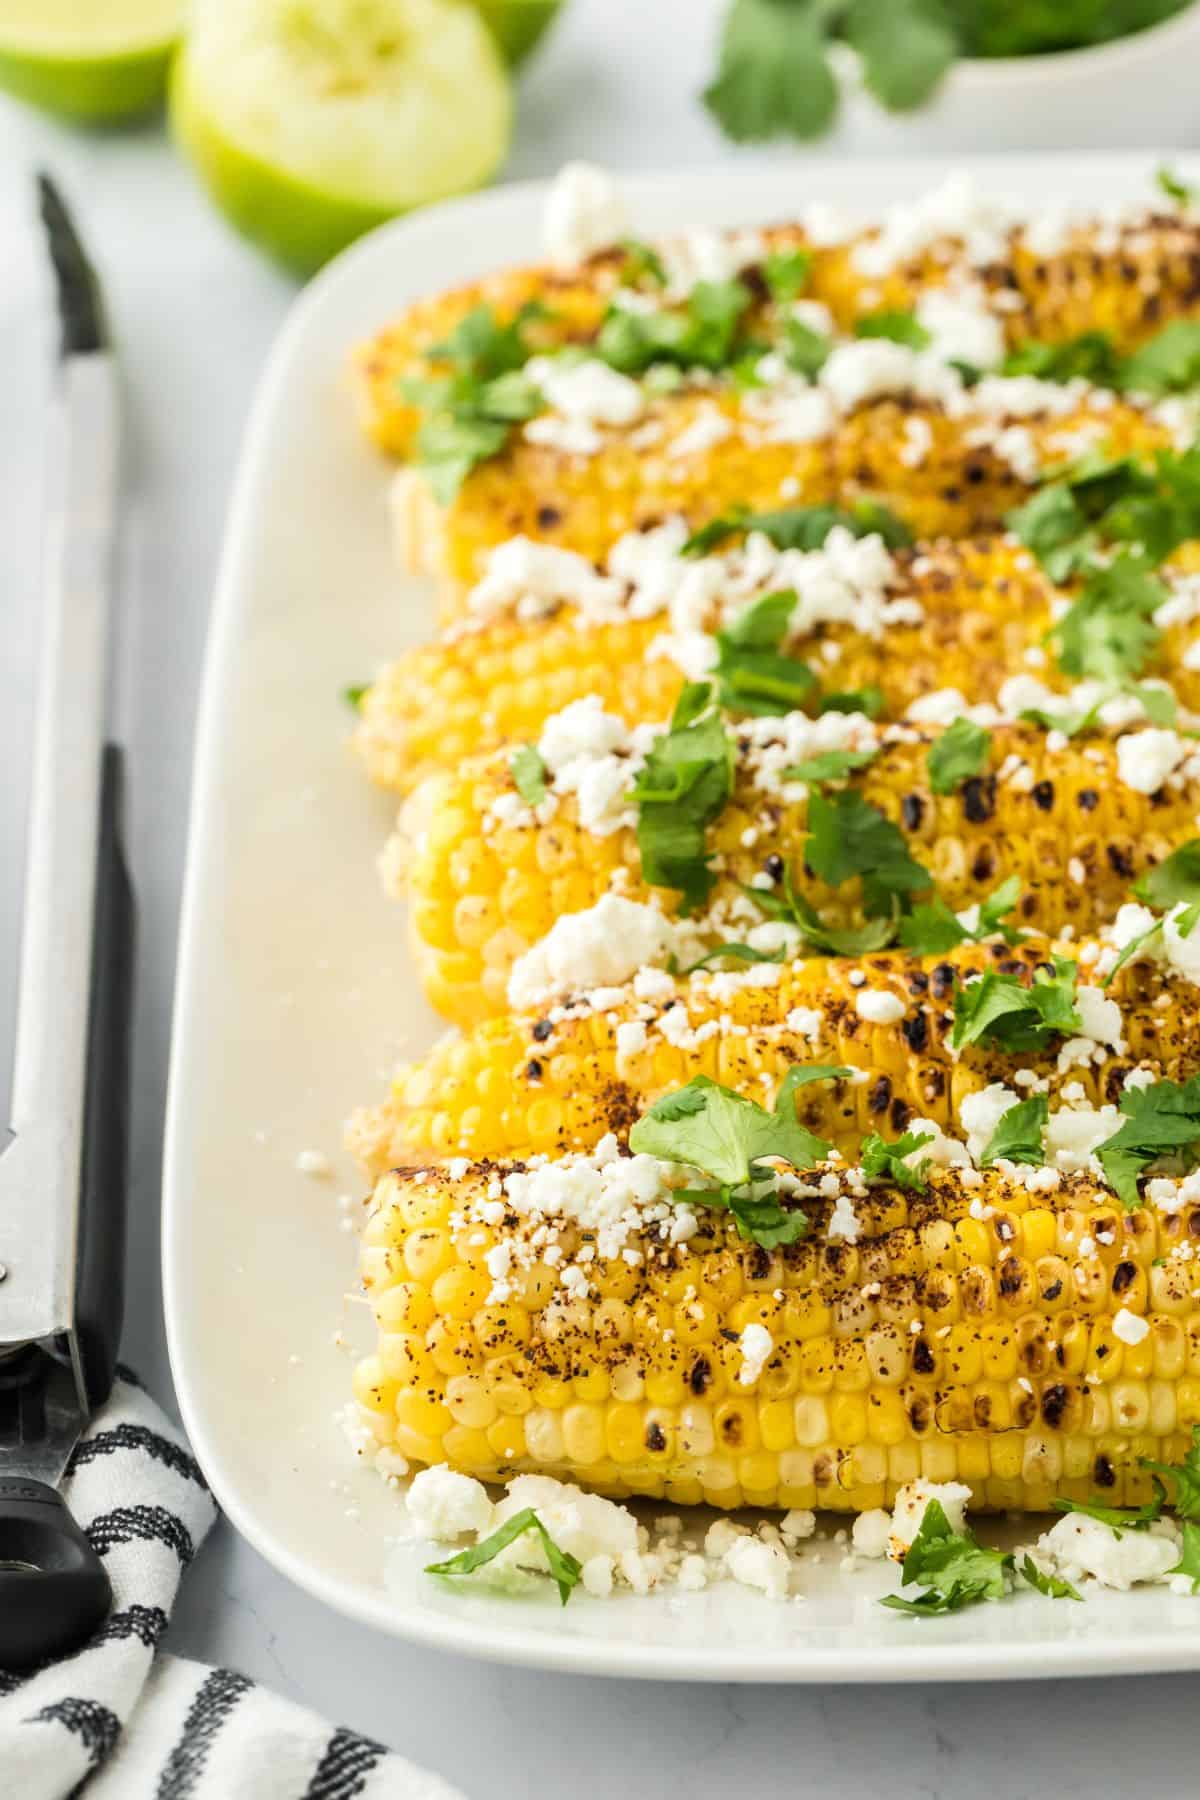 A platter of Mexican grilled corn with limes in the background.